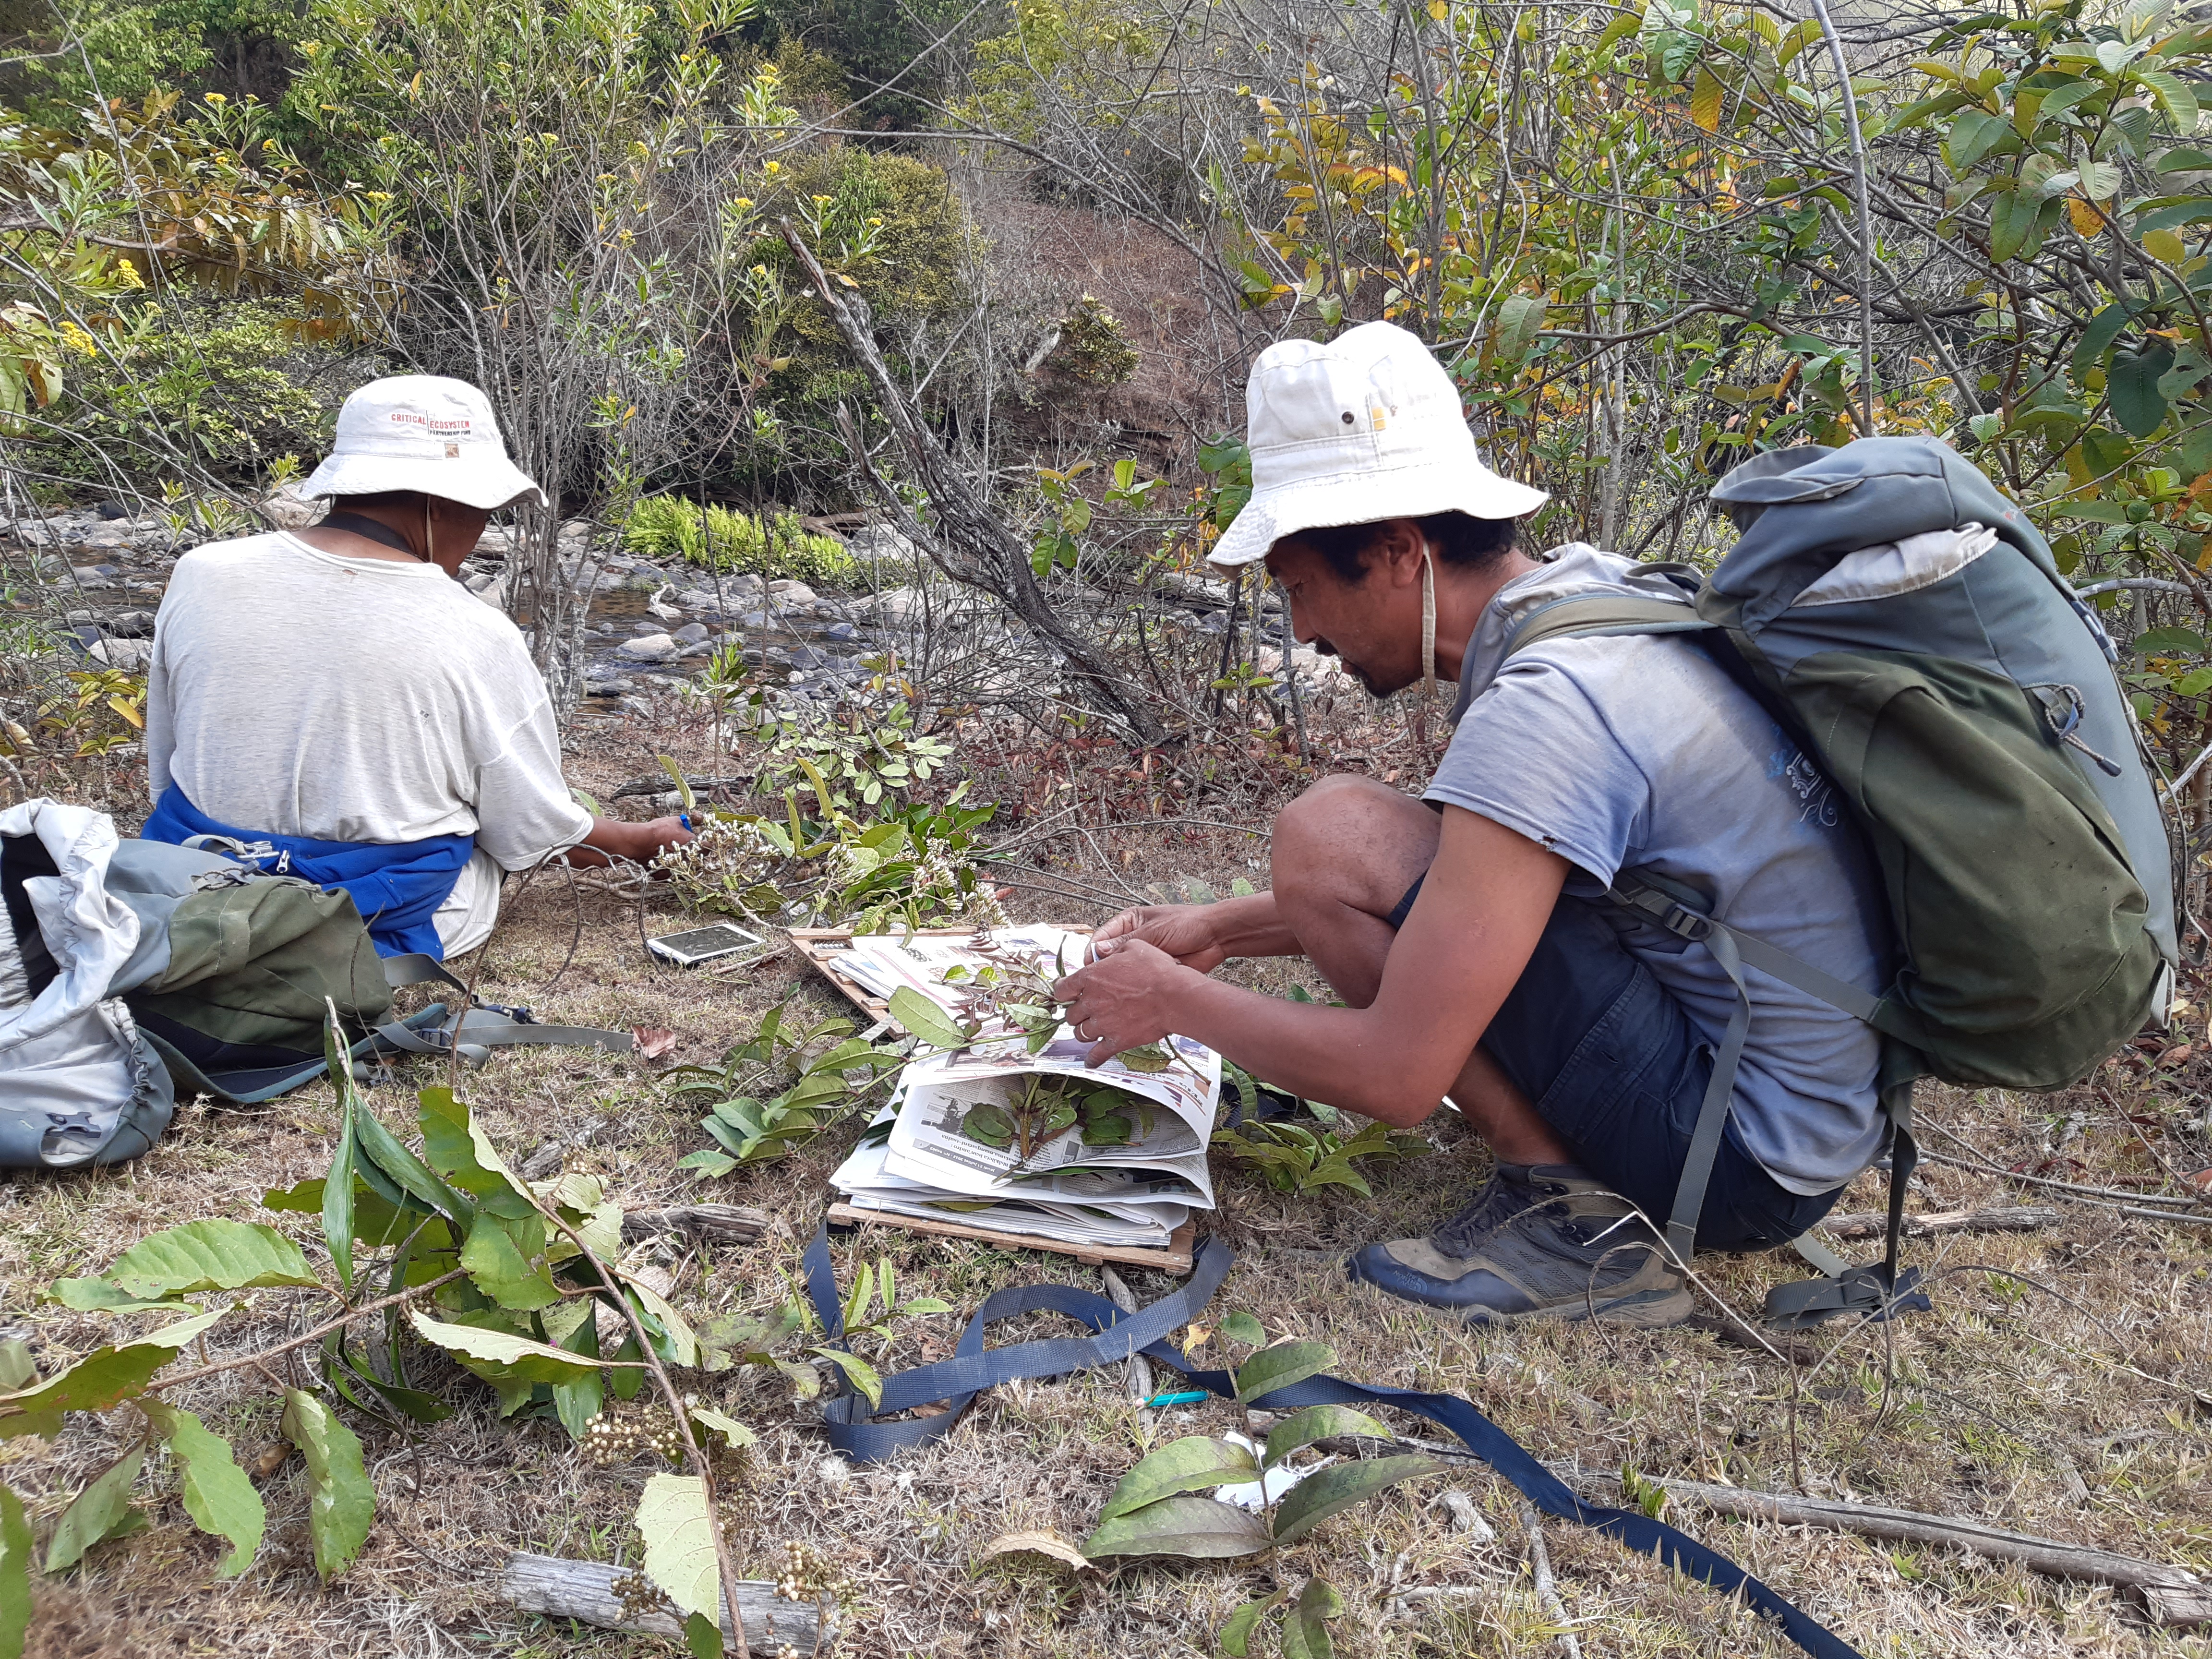 Two members of the expedition team are crouched among grassland and bushes collecting plant specimens. Each is carefully wrapped for the onwards journey. 